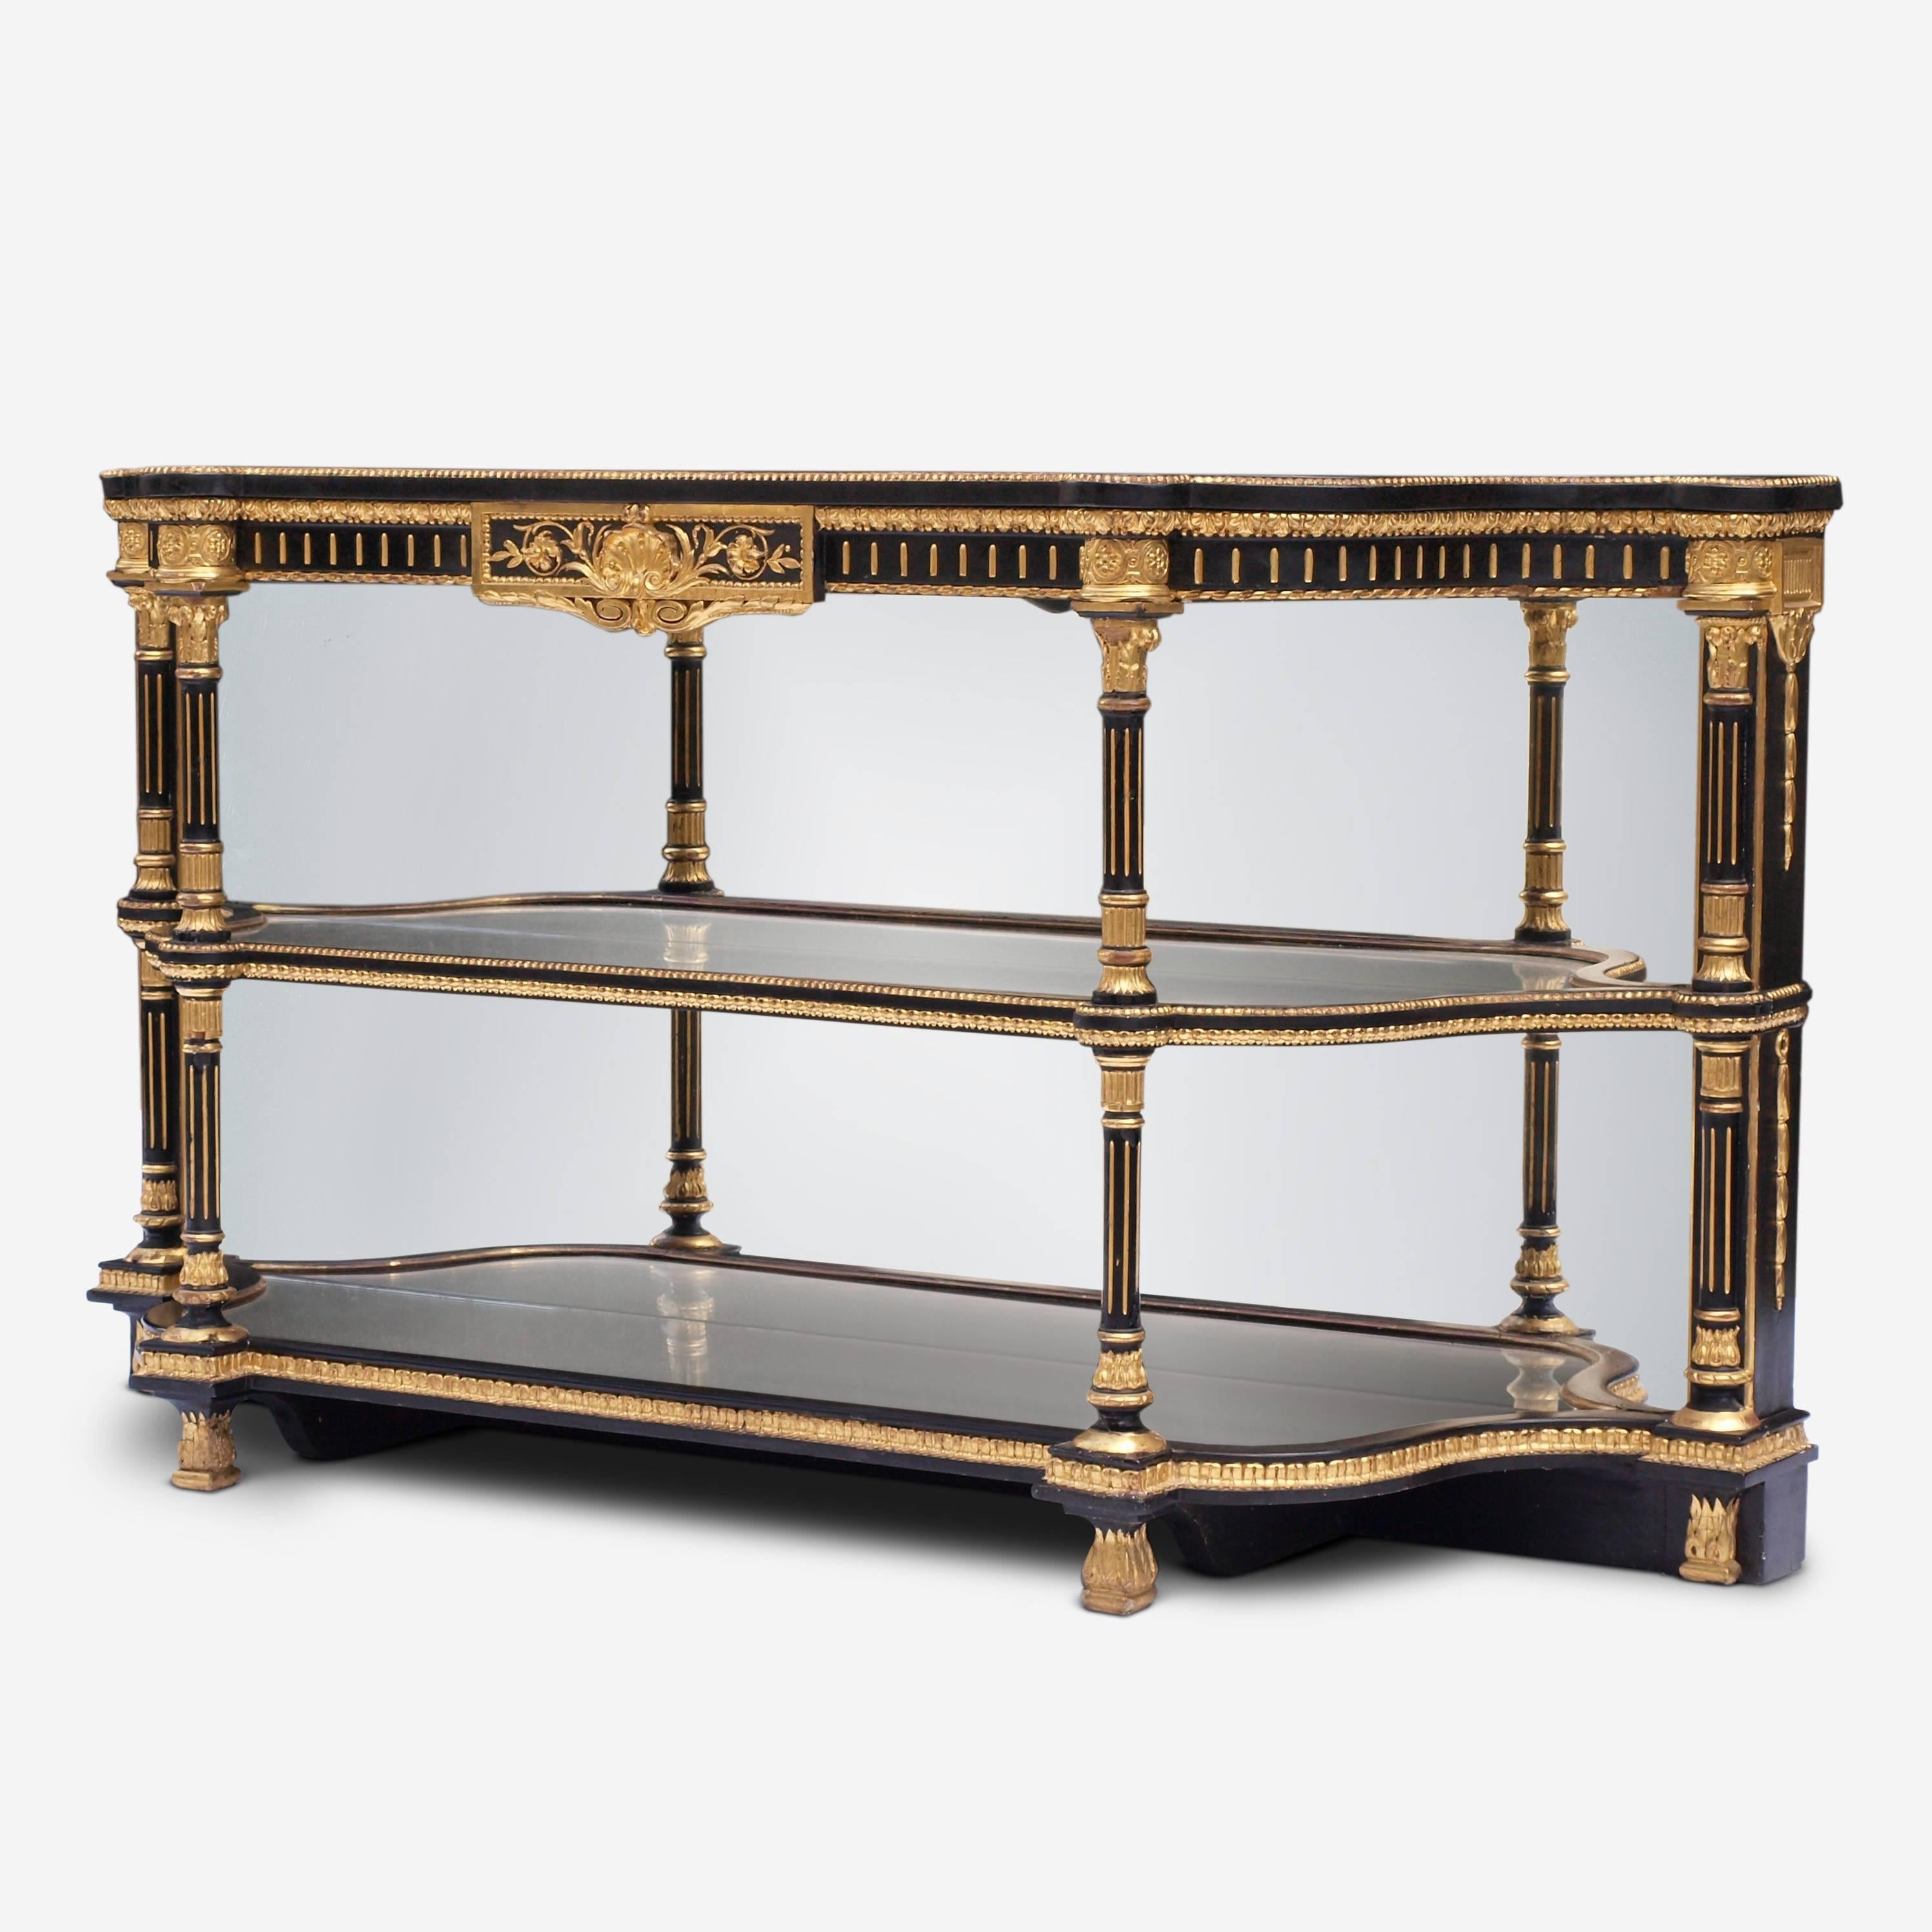 19th Century Ebonized Mirrored and Gilt Cabinet by Charles Nosotti circa 1850